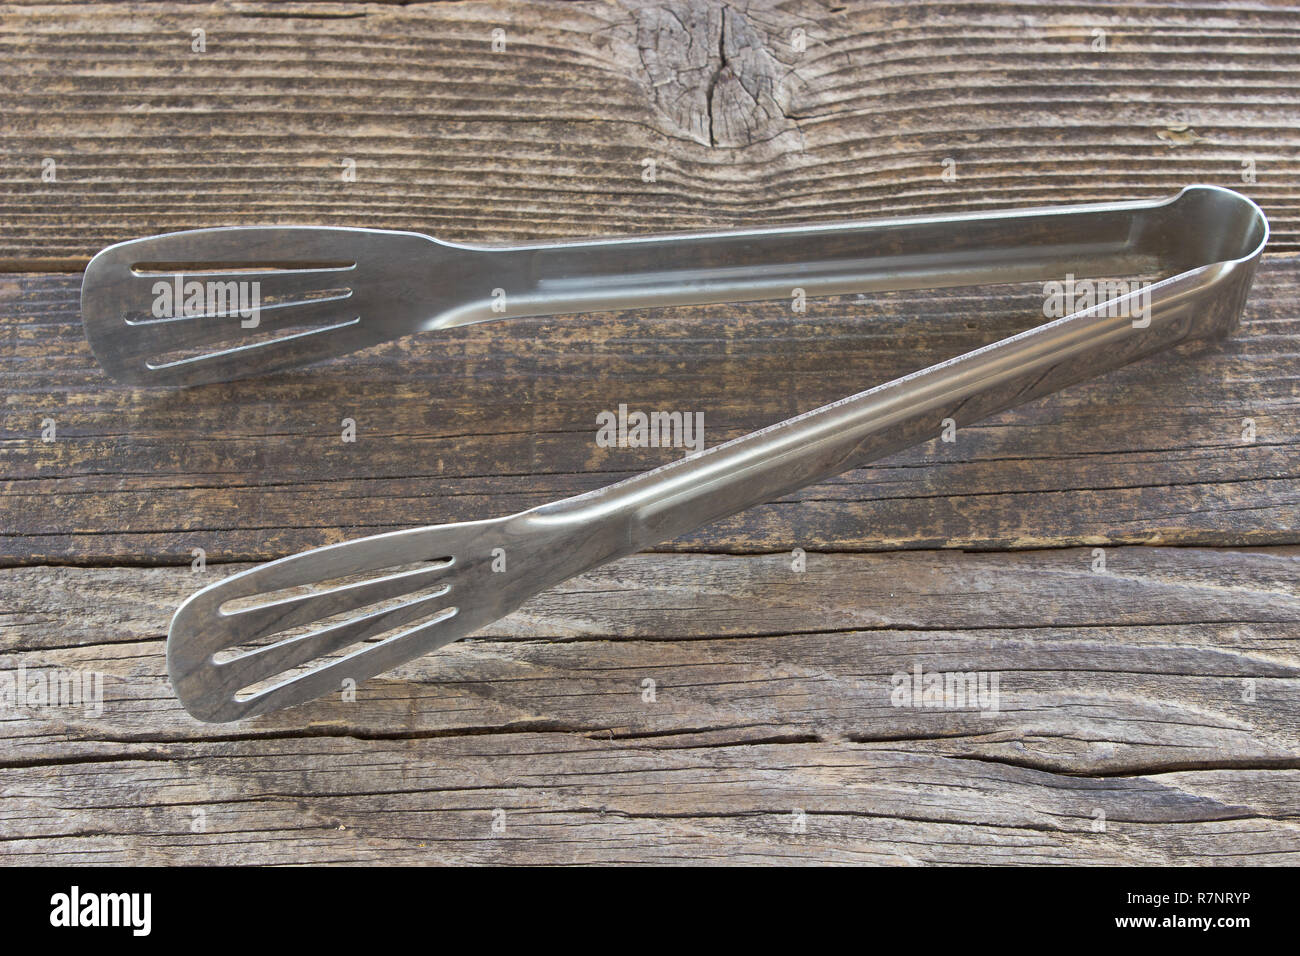 Serving tongs on wooden background Stock Photo